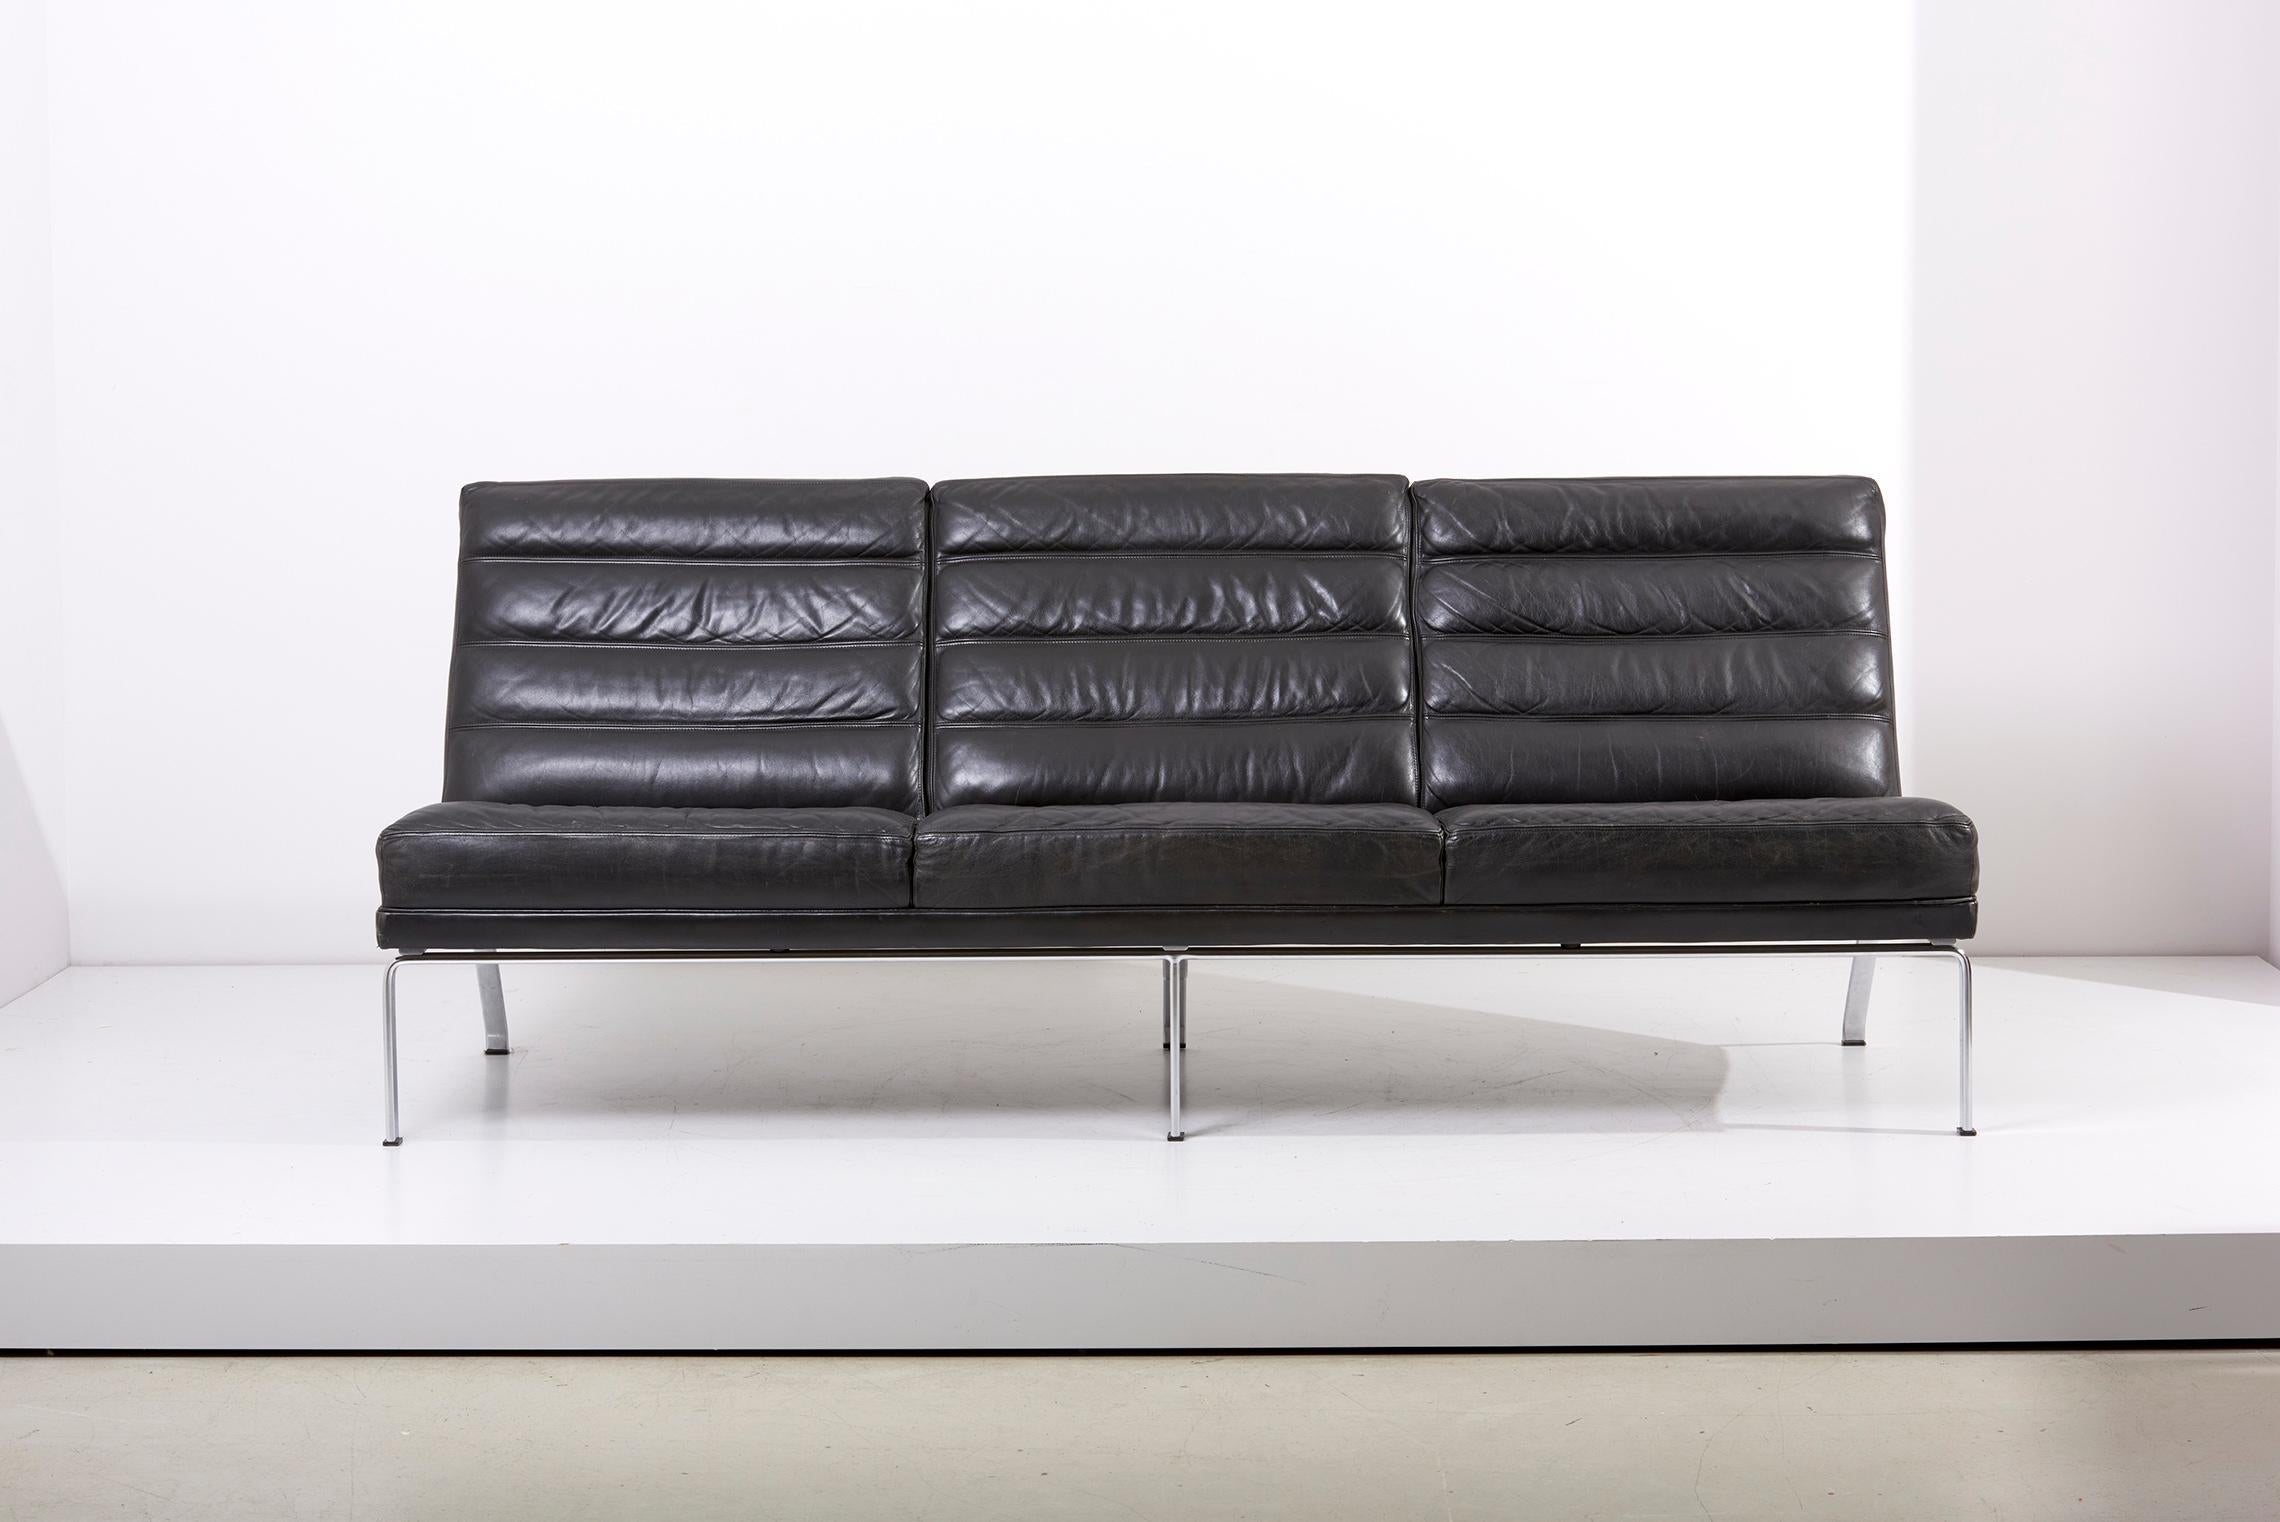 3-seater sofa in black leather by Horst Brüning for Kill International, Germany, 1960s
Very good original condition.